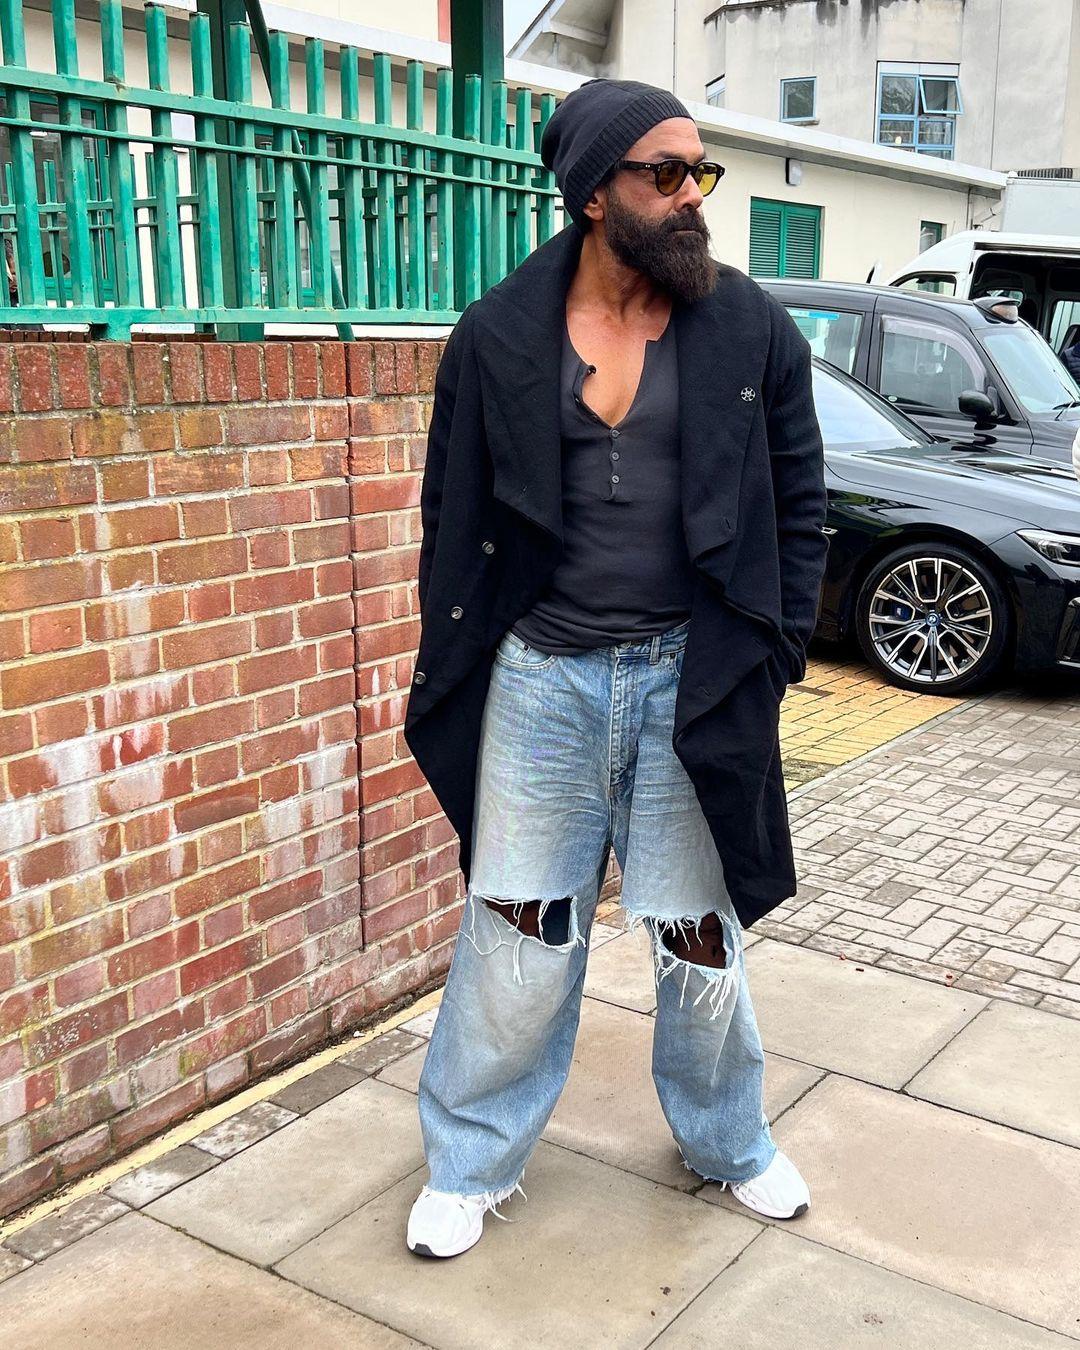 Bobby Deol has shared several photos over the past months which saw him carry around his bearded look with swag